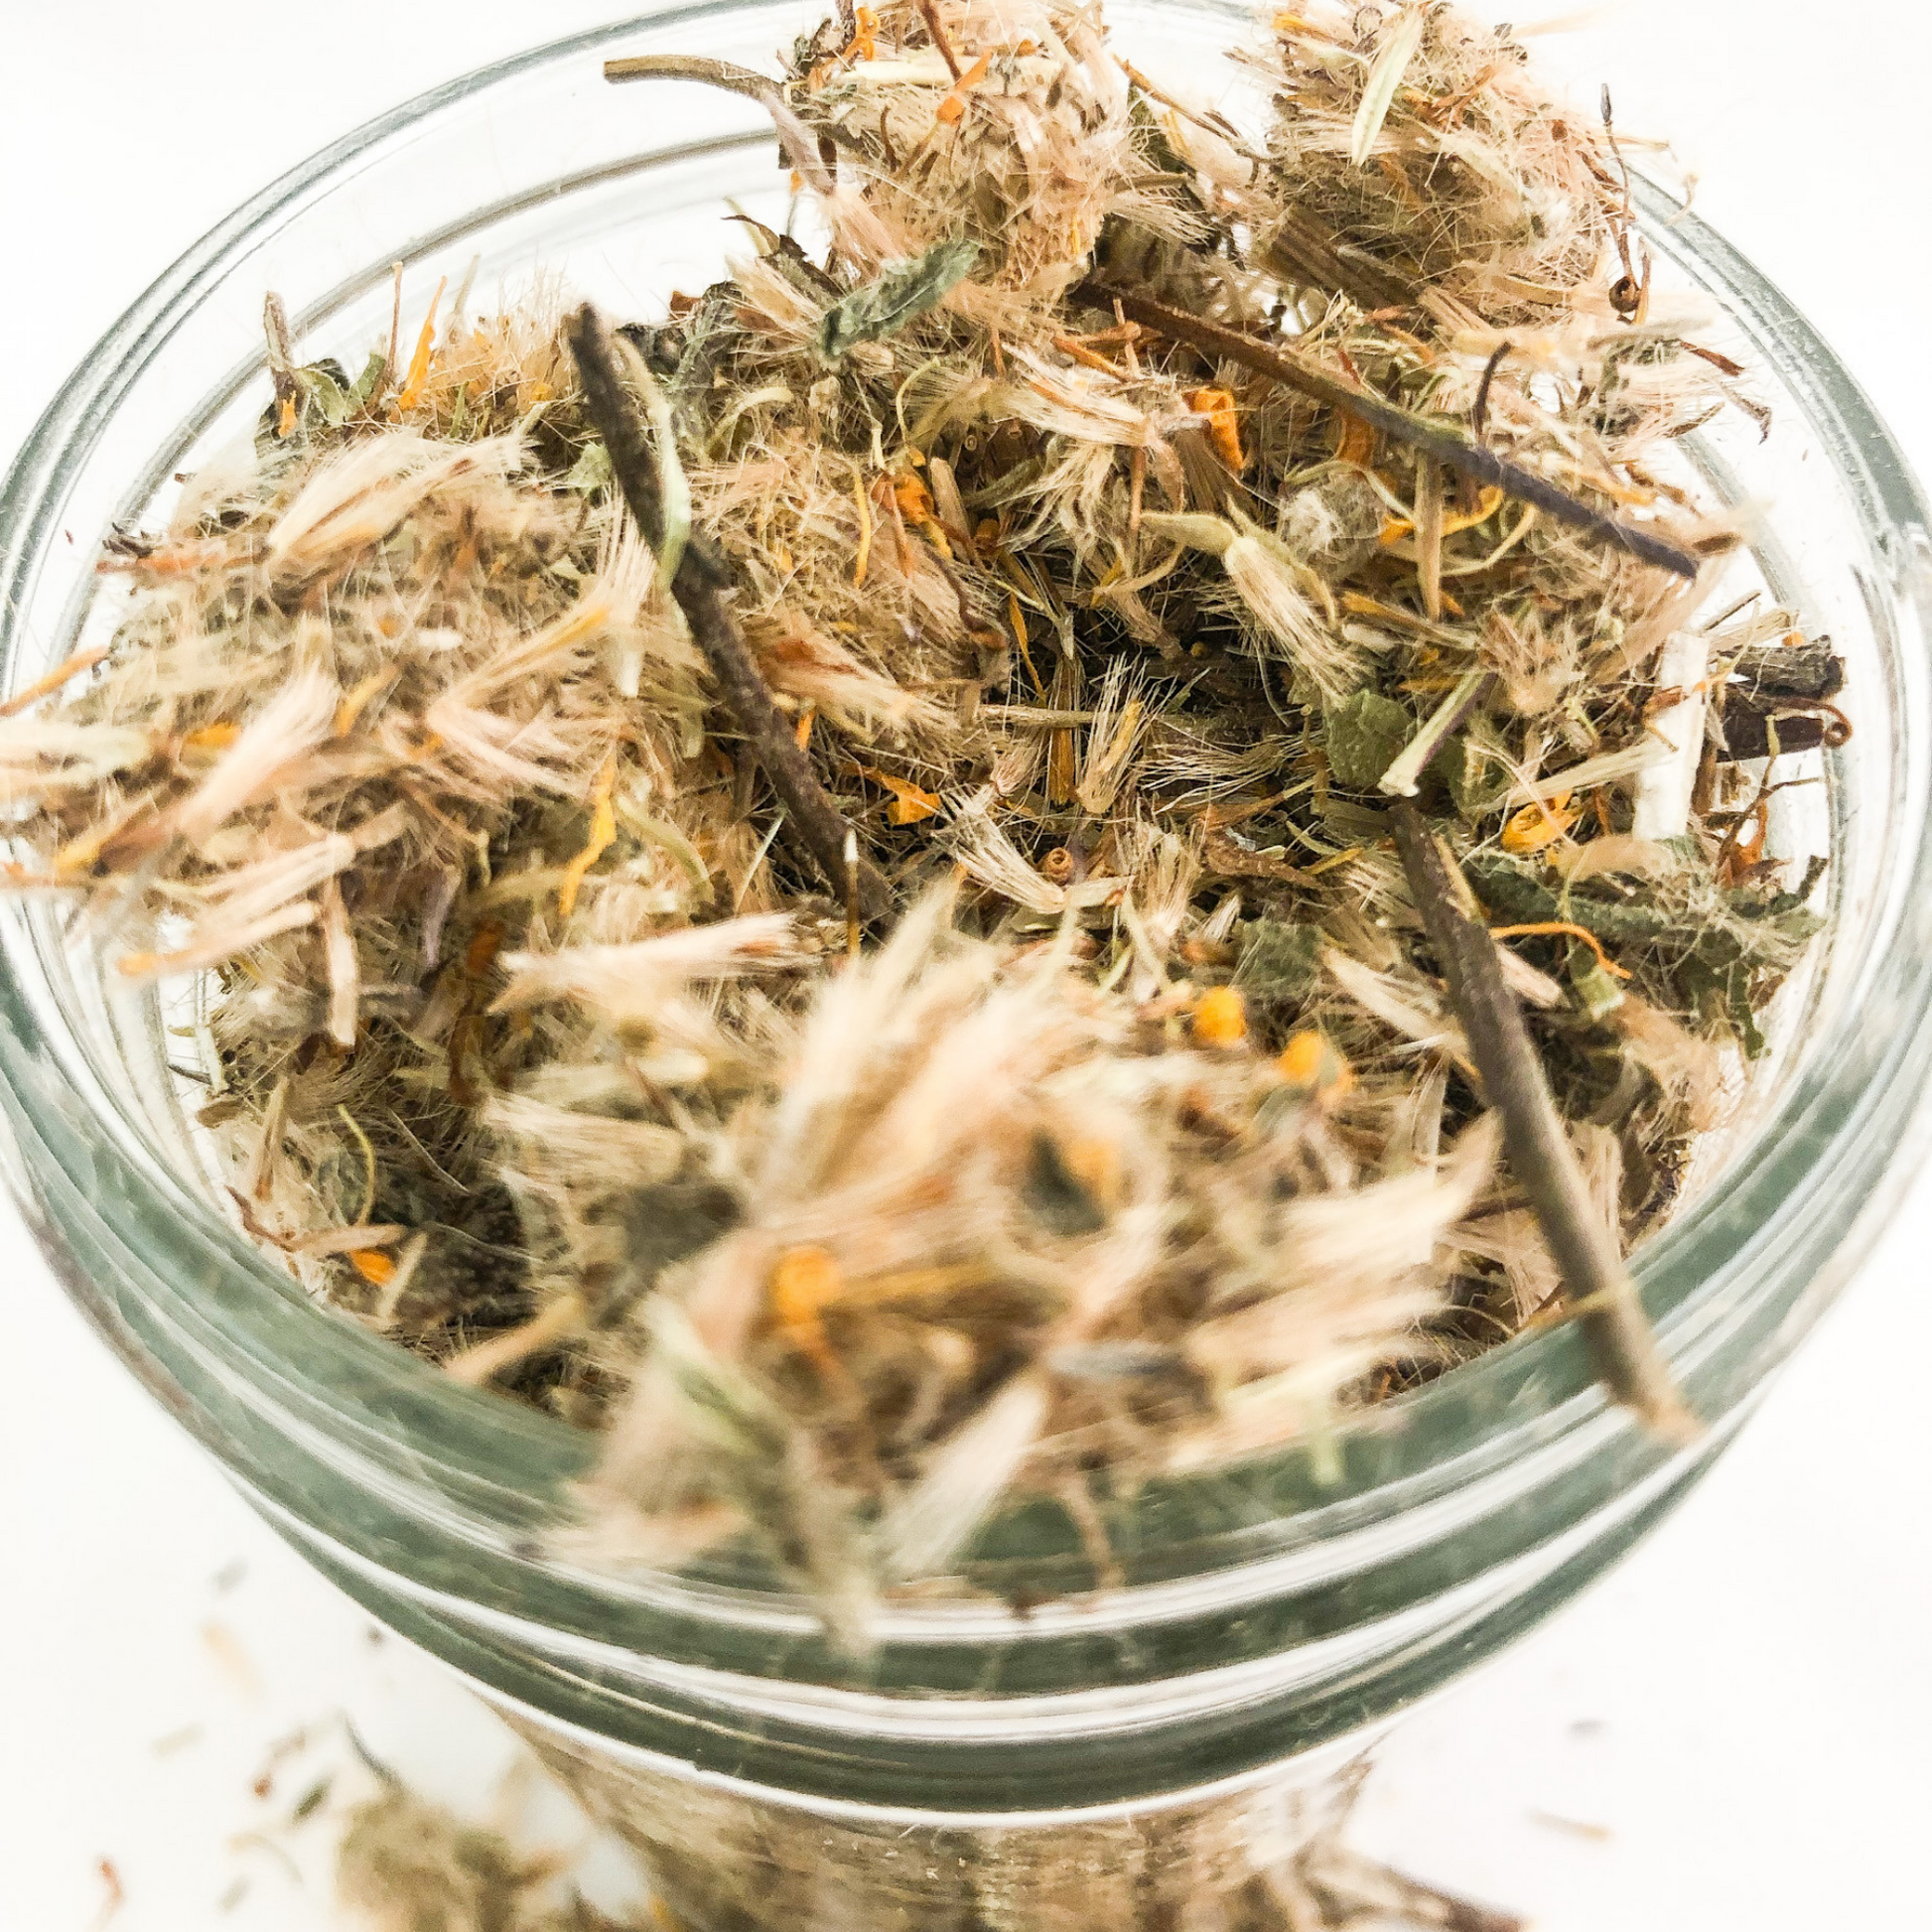 unclose image of dried arnica flowers in a clear jar with white background